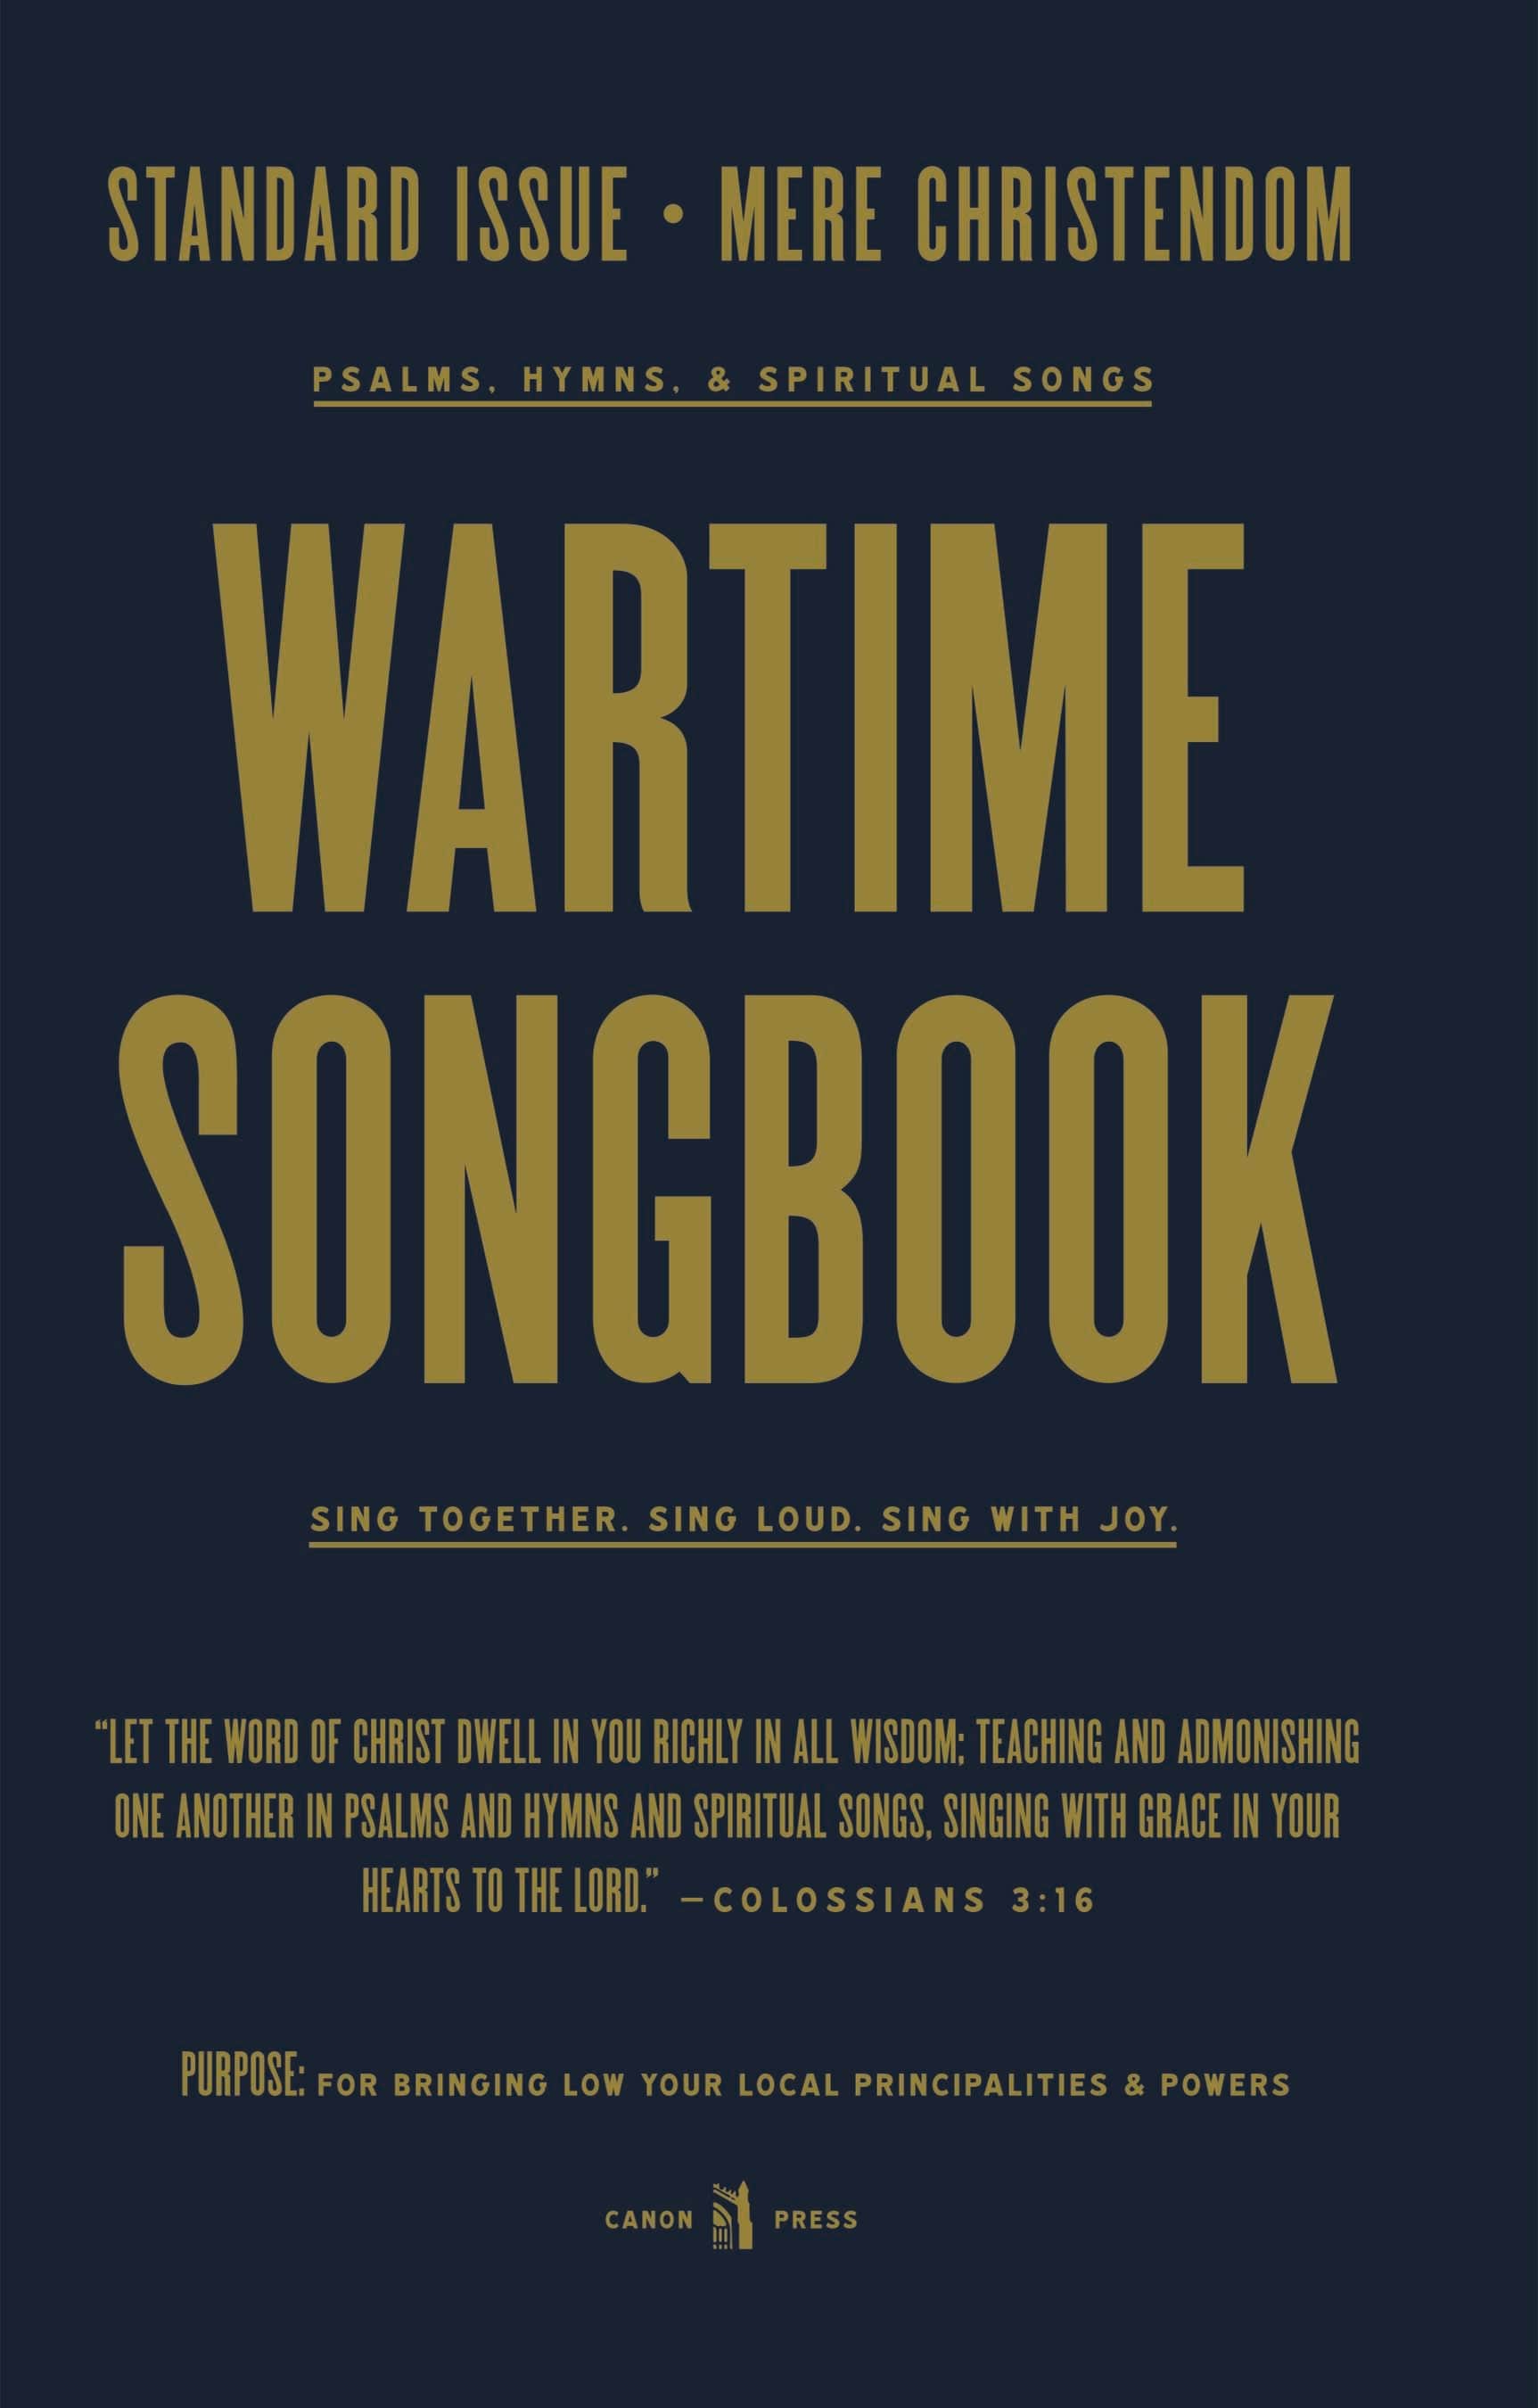 Wartime Songbook